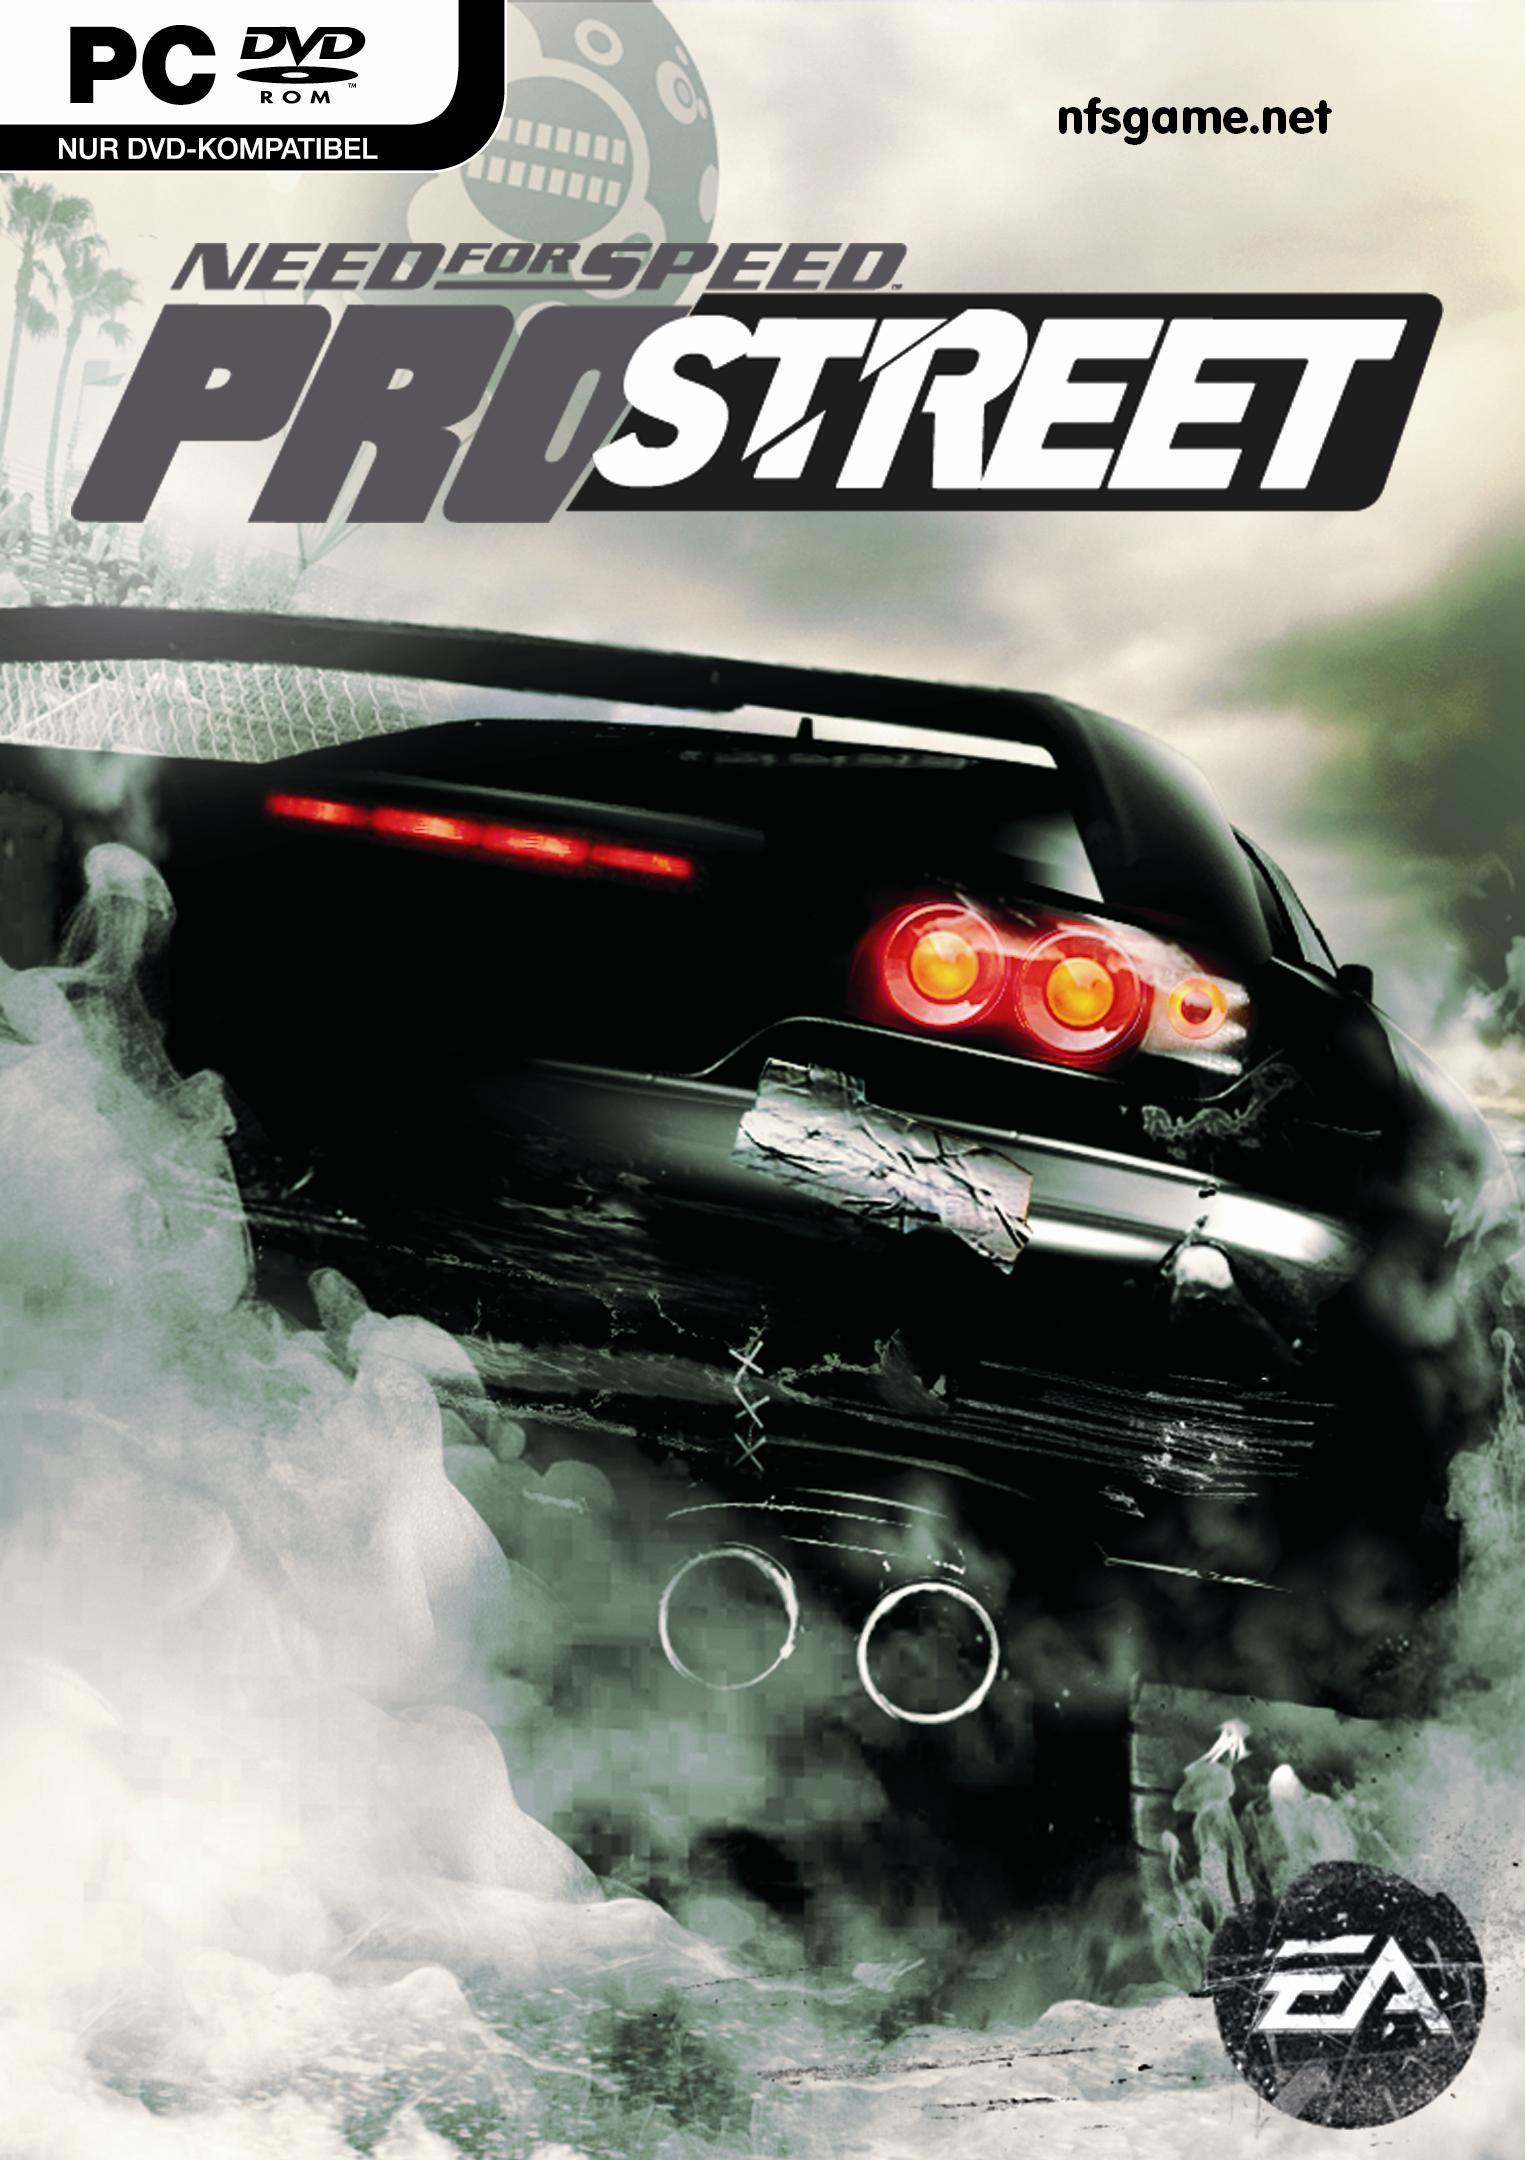 Need for Speed: ProStreet Picture